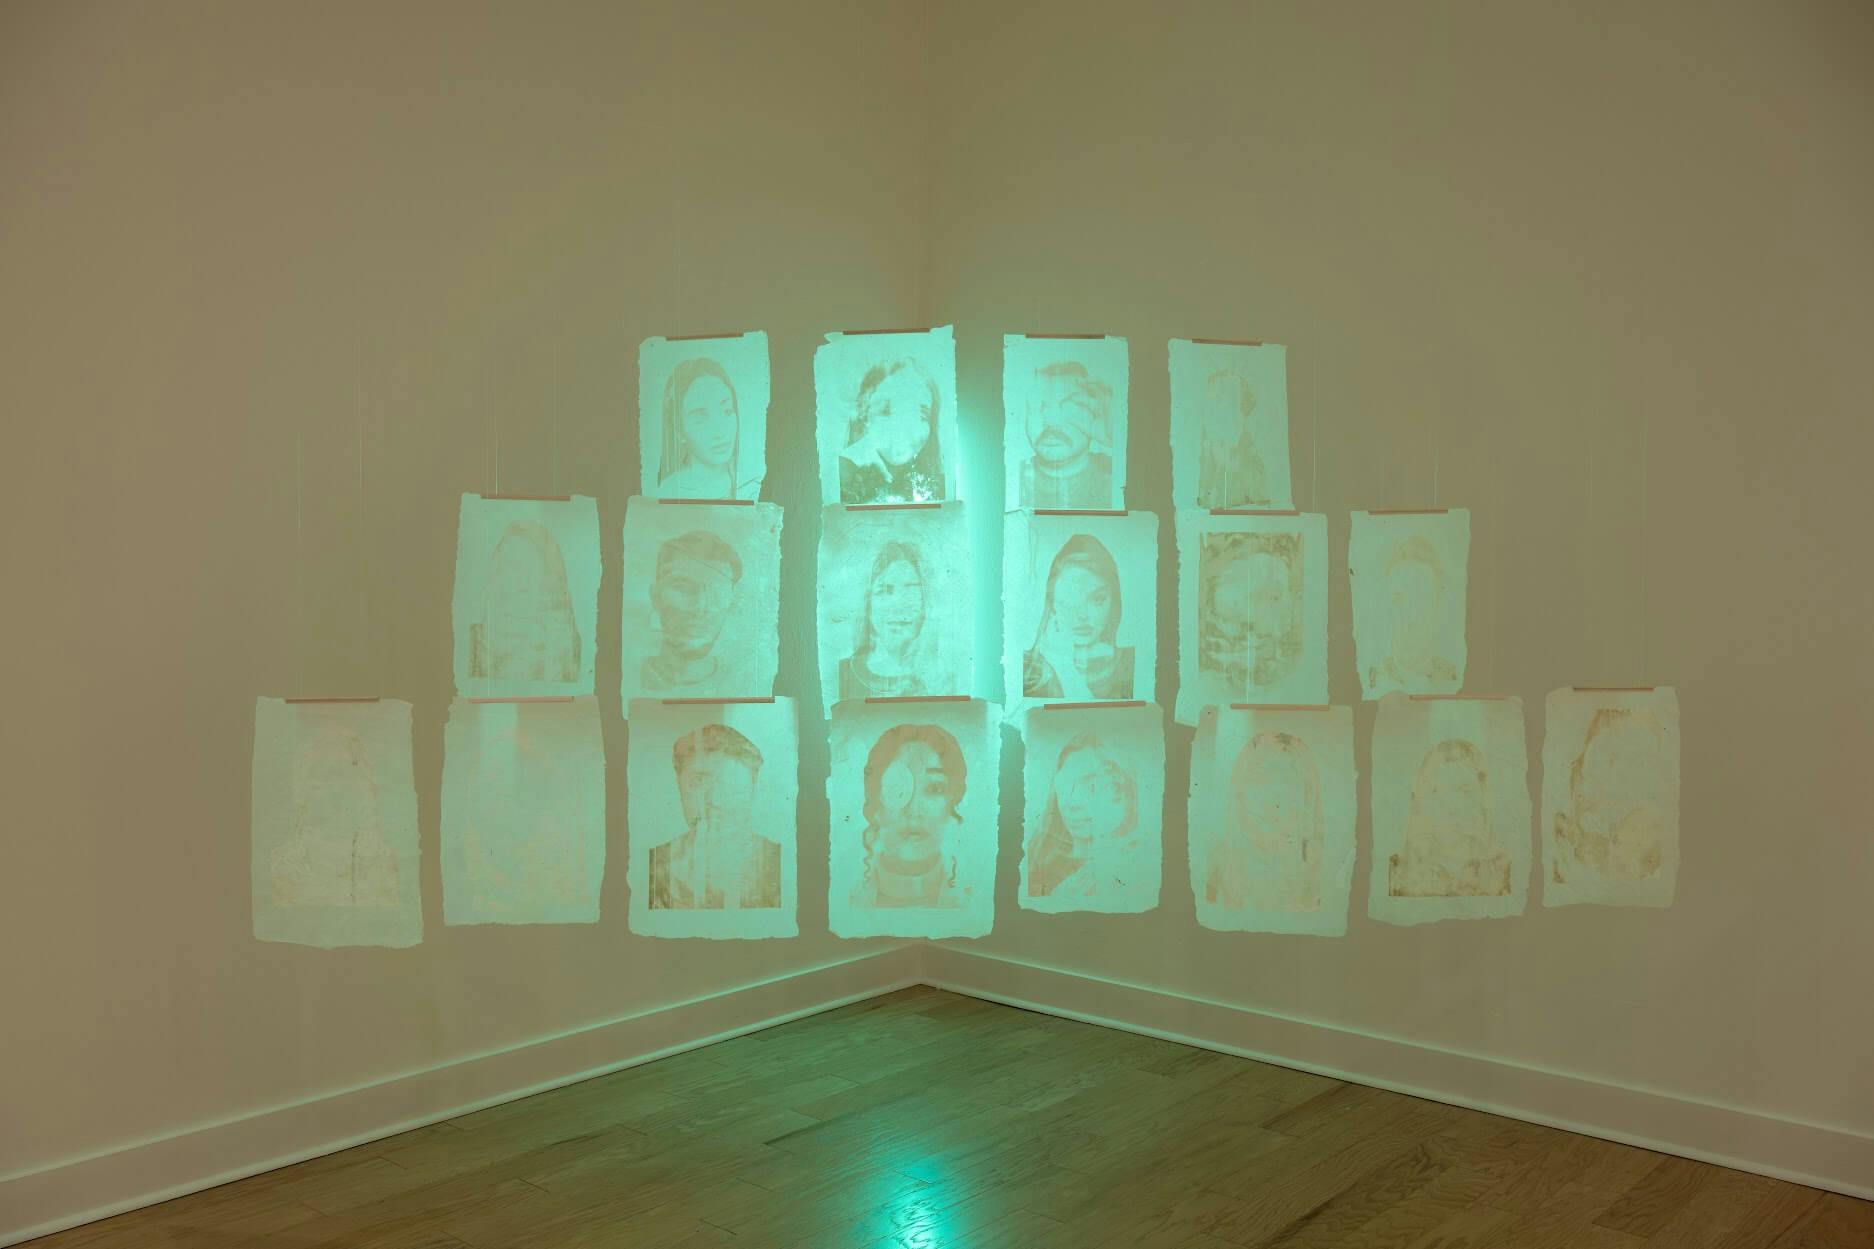 A squat pyramid of prints faintly etched with faces, lit up by a green light coming from beneath.